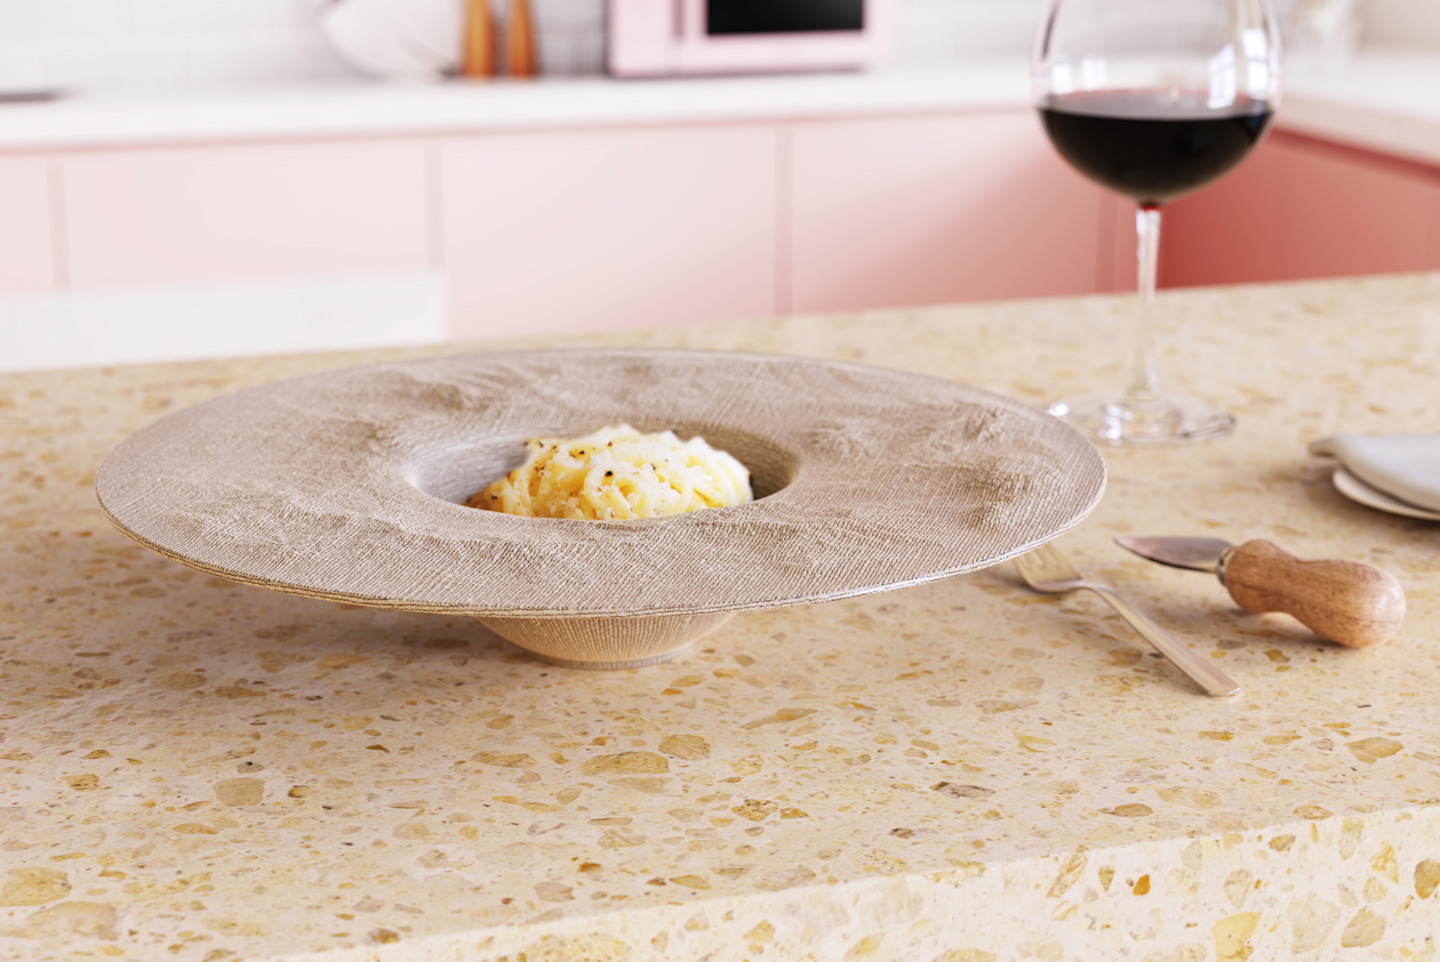 #This Pasta Bowl was designed to highlight the imperfect beauty of Parmigiano Reggiano’s cheese